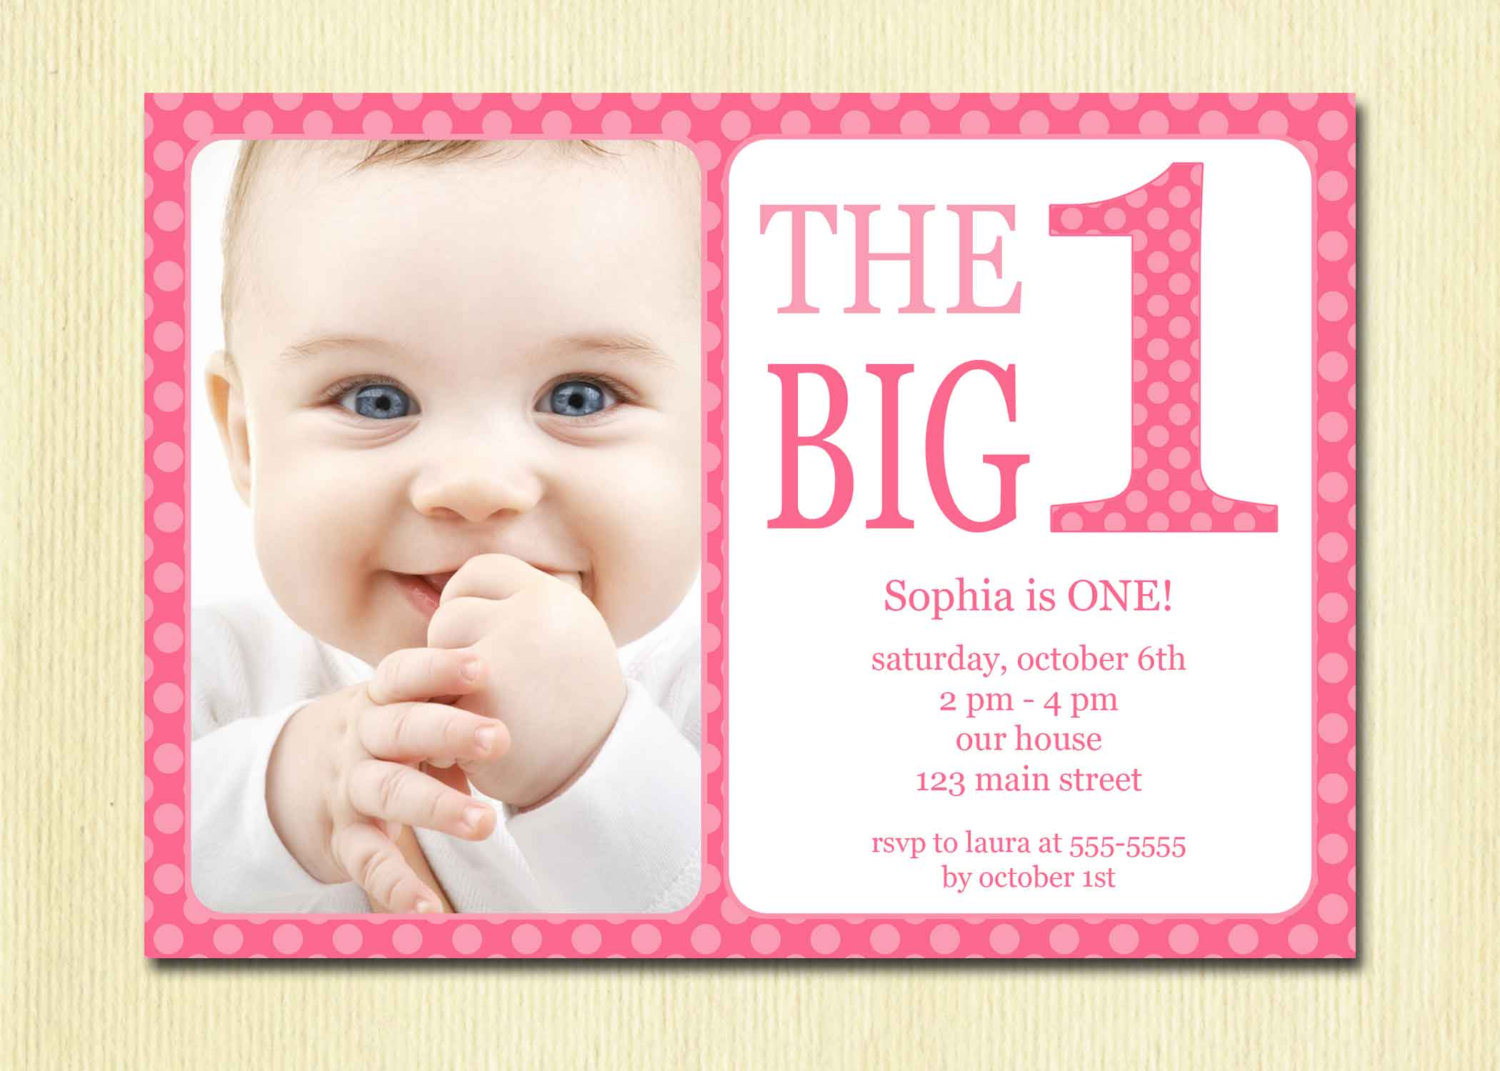 7 Best Images of First Birthday Party Invitations Printable Free Baby